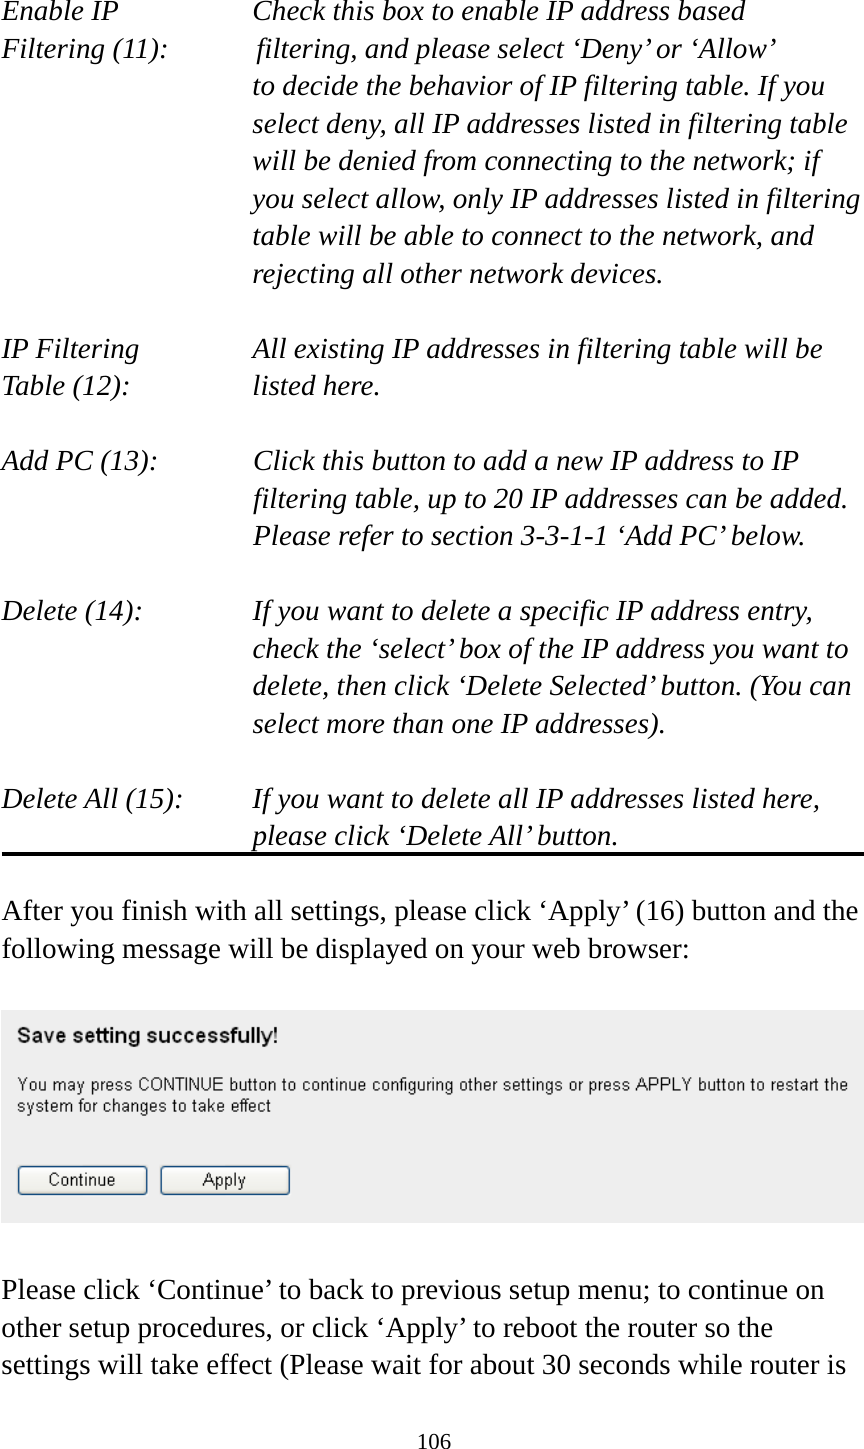 106  Enable IP        Check this box to enable IP address based Filtering (11):      filtering, and please select ‘Deny’ or ‘Allow’   to decide the behavior of IP filtering table. If you select deny, all IP addresses listed in filtering table will be denied from connecting to the network; if you select allow, only IP addresses listed in filtering table will be able to connect to the network, and rejecting all other network devices.  IP Filtering      All existing IP addresses in filtering table will be Table (12):       listed here.  Add PC (13):    Click this button to add a new IP address to IP filtering table, up to 20 IP addresses can be added.   Please refer to section 3-3-1-1 ‘Add PC’ below.    Delete (14):      If you want to delete a specific IP address entry,     check the ‘select’ box of the IP address you want to delete, then click ‘Delete Selected’ button. (You can select more than one IP addresses).  Delete All (15):    If you want to delete all IP addresses listed here, please click ‘Delete All’ button.  After you finish with all settings, please click ‘Apply’ (16) button and the following message will be displayed on your web browser:    Please click ‘Continue’ to back to previous setup menu; to continue on other setup procedures, or click ‘Apply’ to reboot the router so the settings will take effect (Please wait for about 30 seconds while router is 